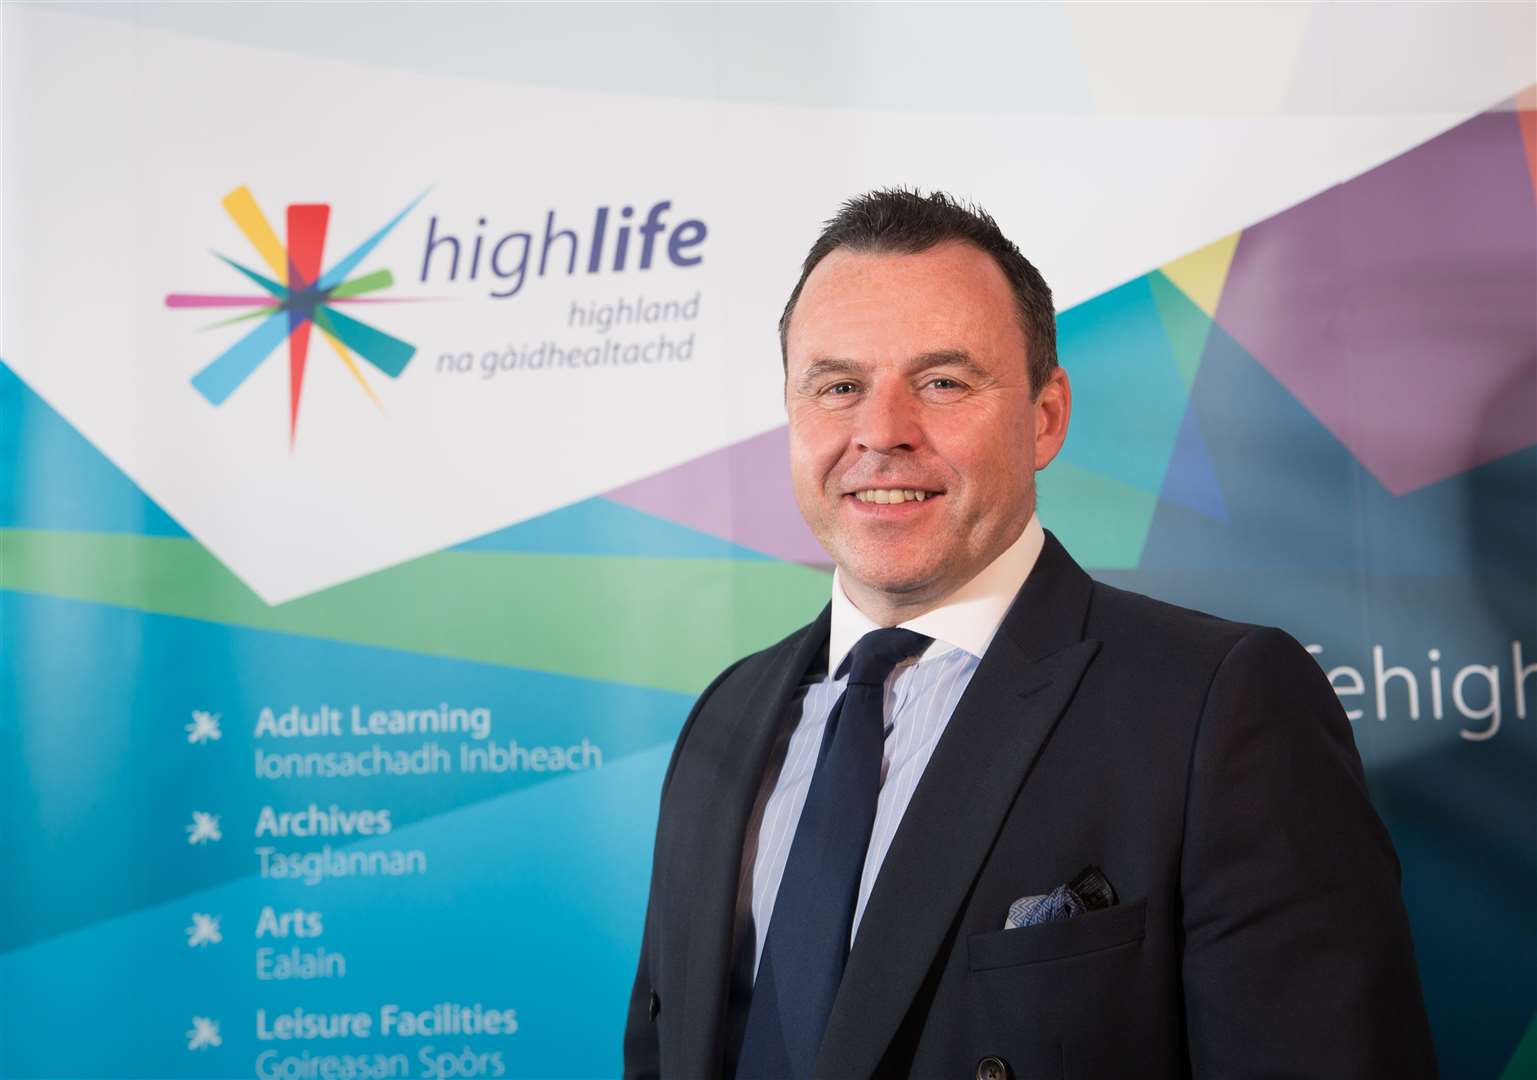 Chief executive Steve Walsh says senior staff have been working to identify ways in which customers can be welcomed back to High Life Highland locations across the region.